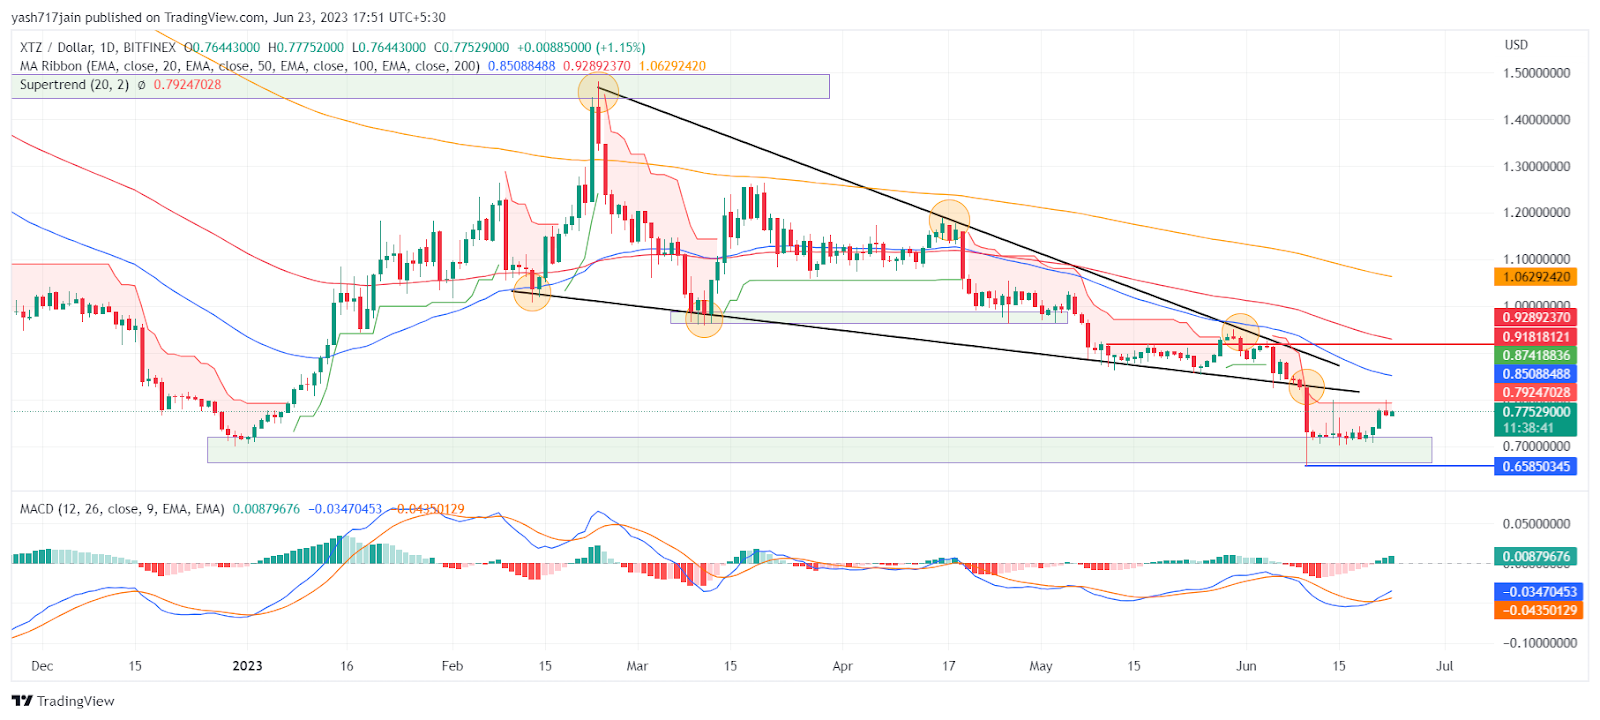 Tezos Coin Price Analysis: Will XTZ Price Continue Downward?